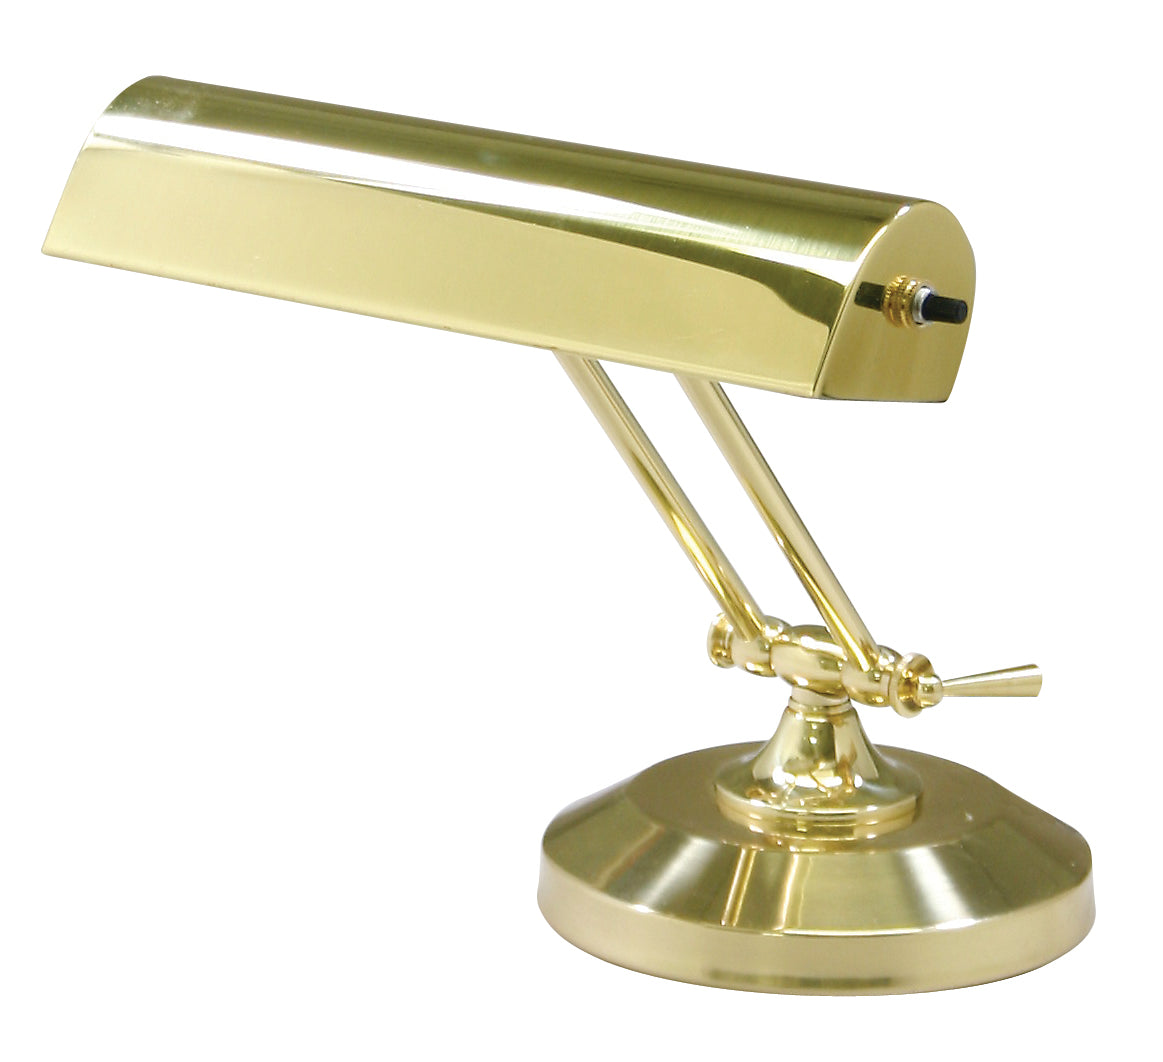 House of Troy Upright Piano Lamp 10" Polished Brass P10-150